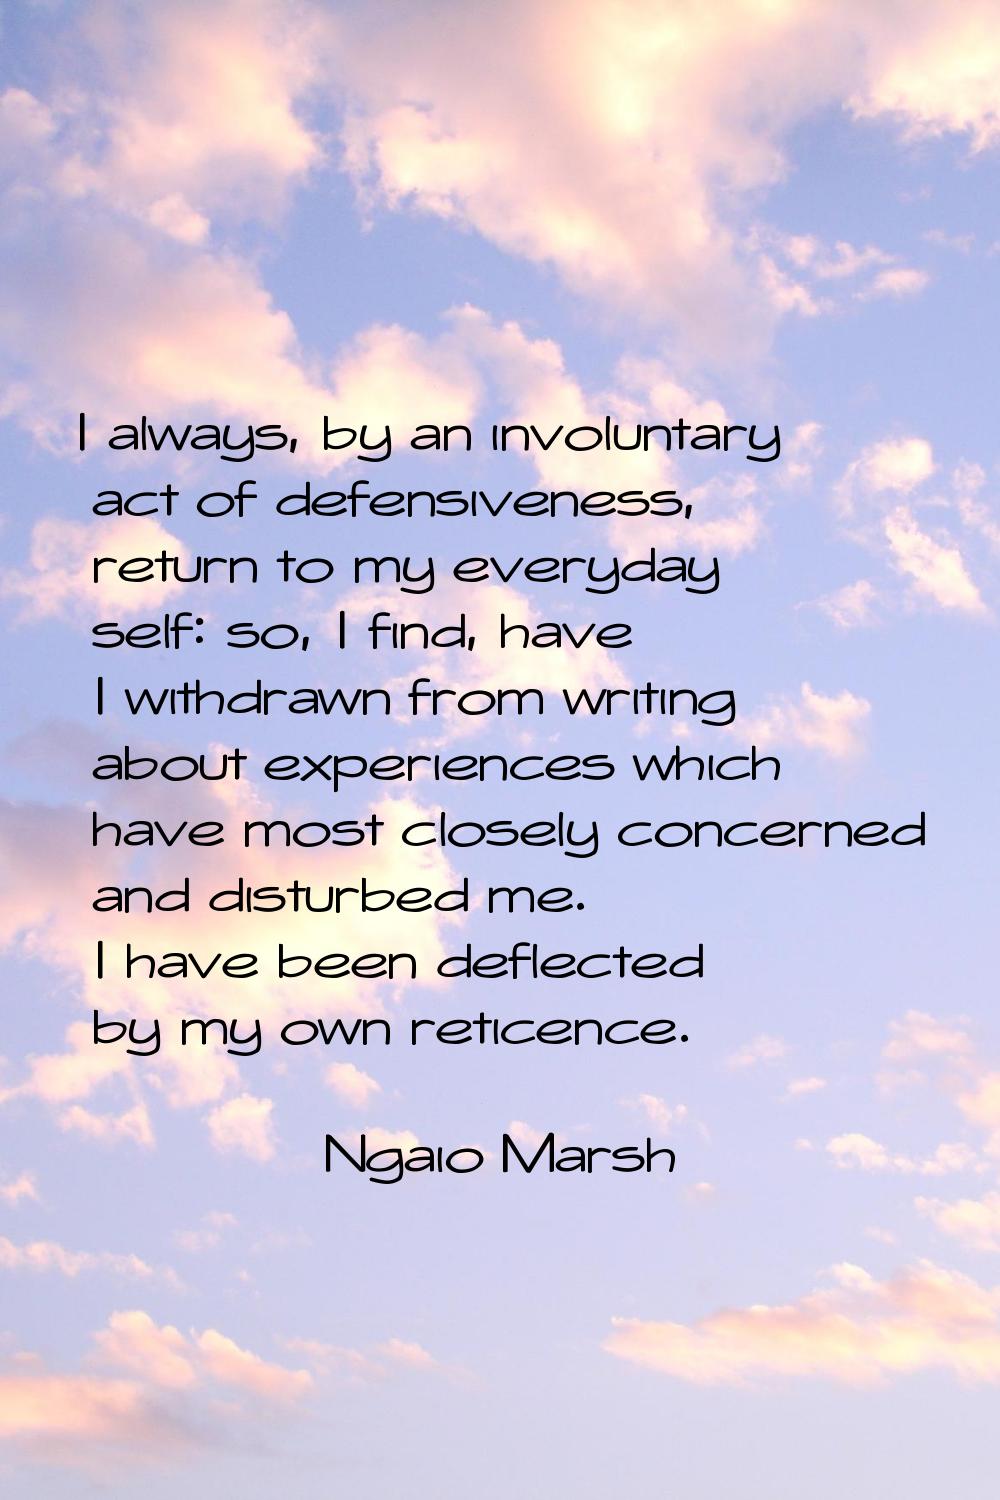 I always, by an involuntary act of defensiveness, return to my everyday self: so, I find, have I wi